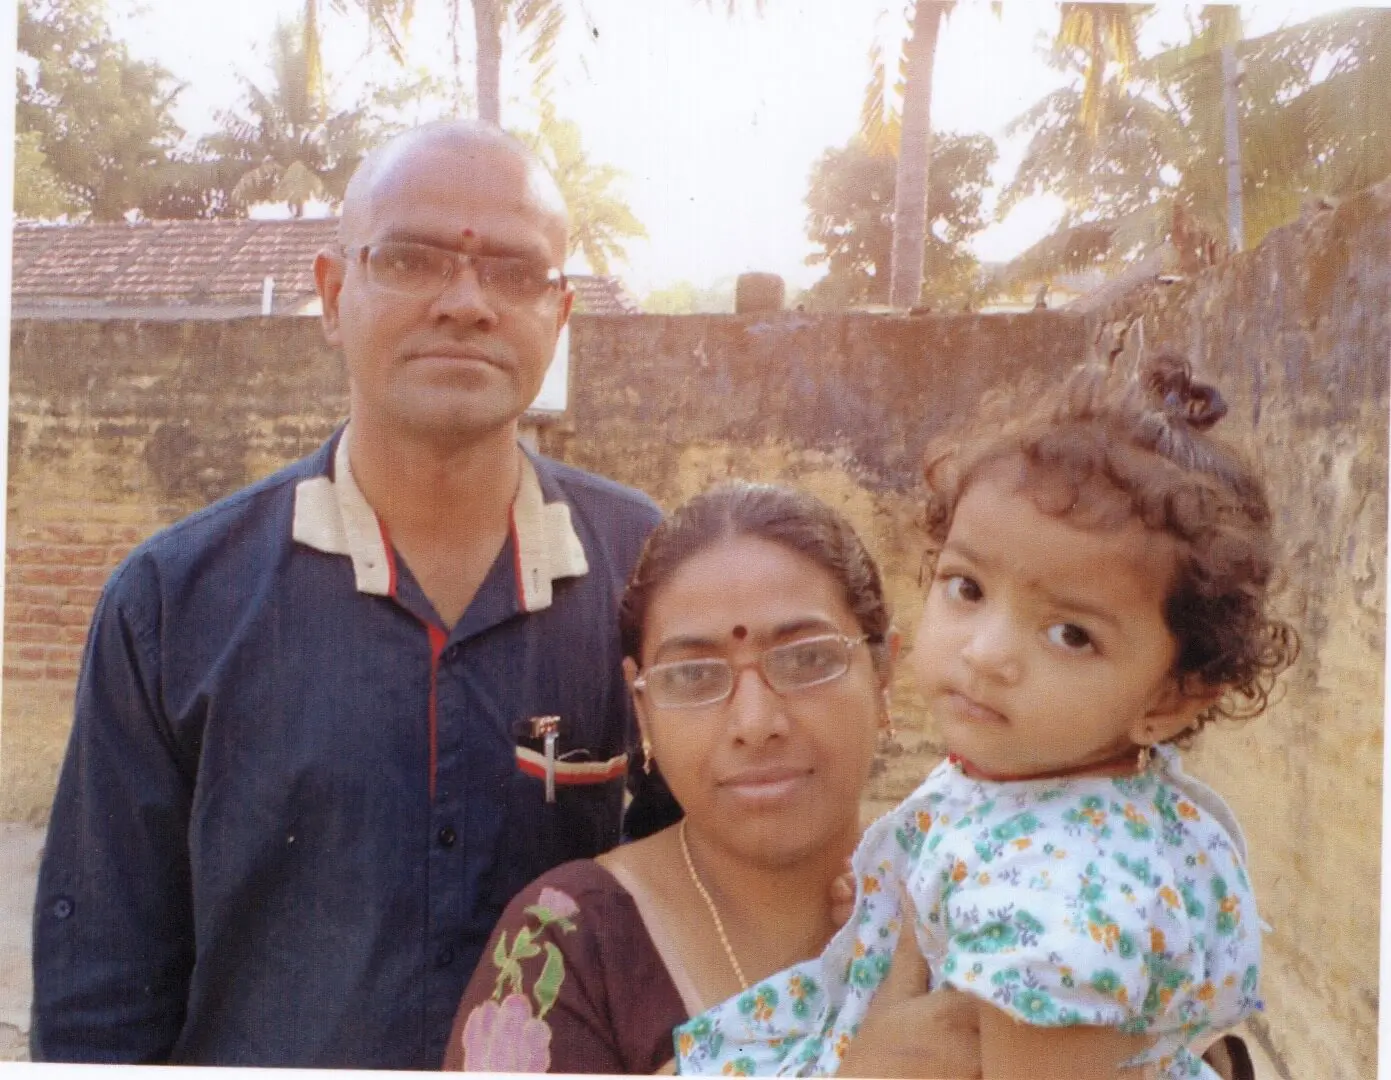 Father (to the left), mother (in the middle), holding a young girl born through ICSI at Karthika Datta's IVF clinic, against a backdrop of tiled roofs and coconut trees.